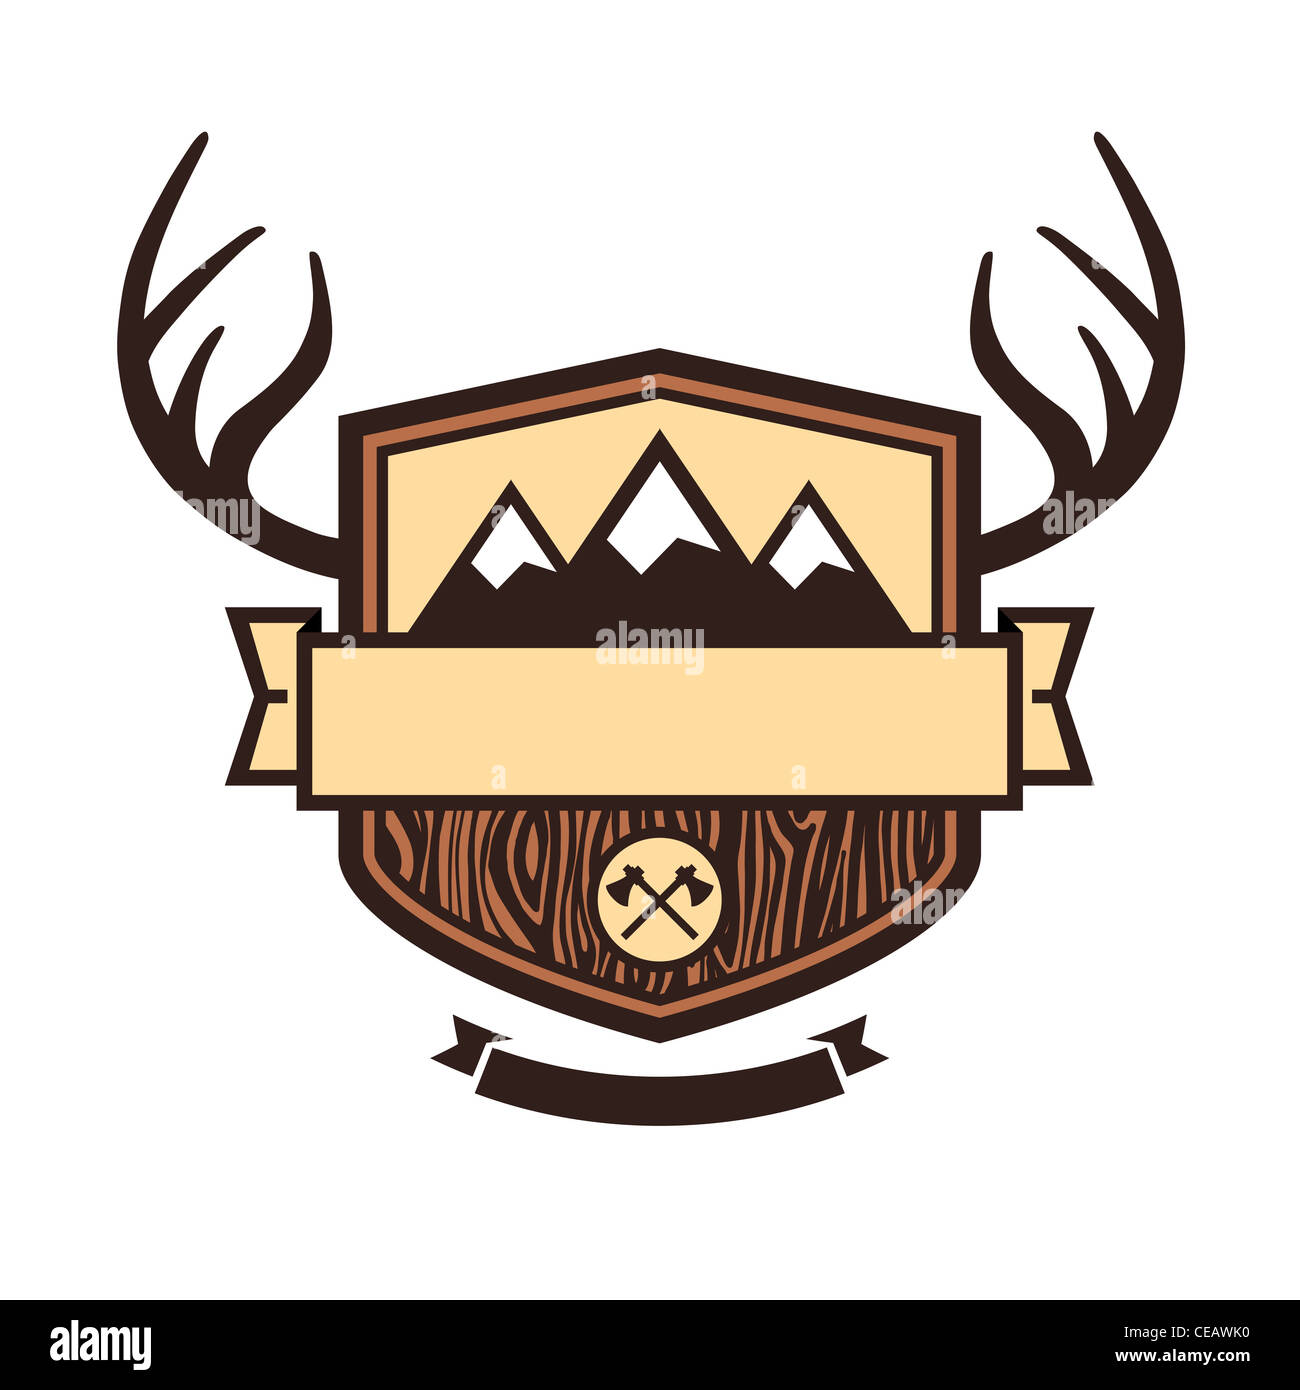 Wood themed outdoors emblem with mountains and antlers Stock Photo